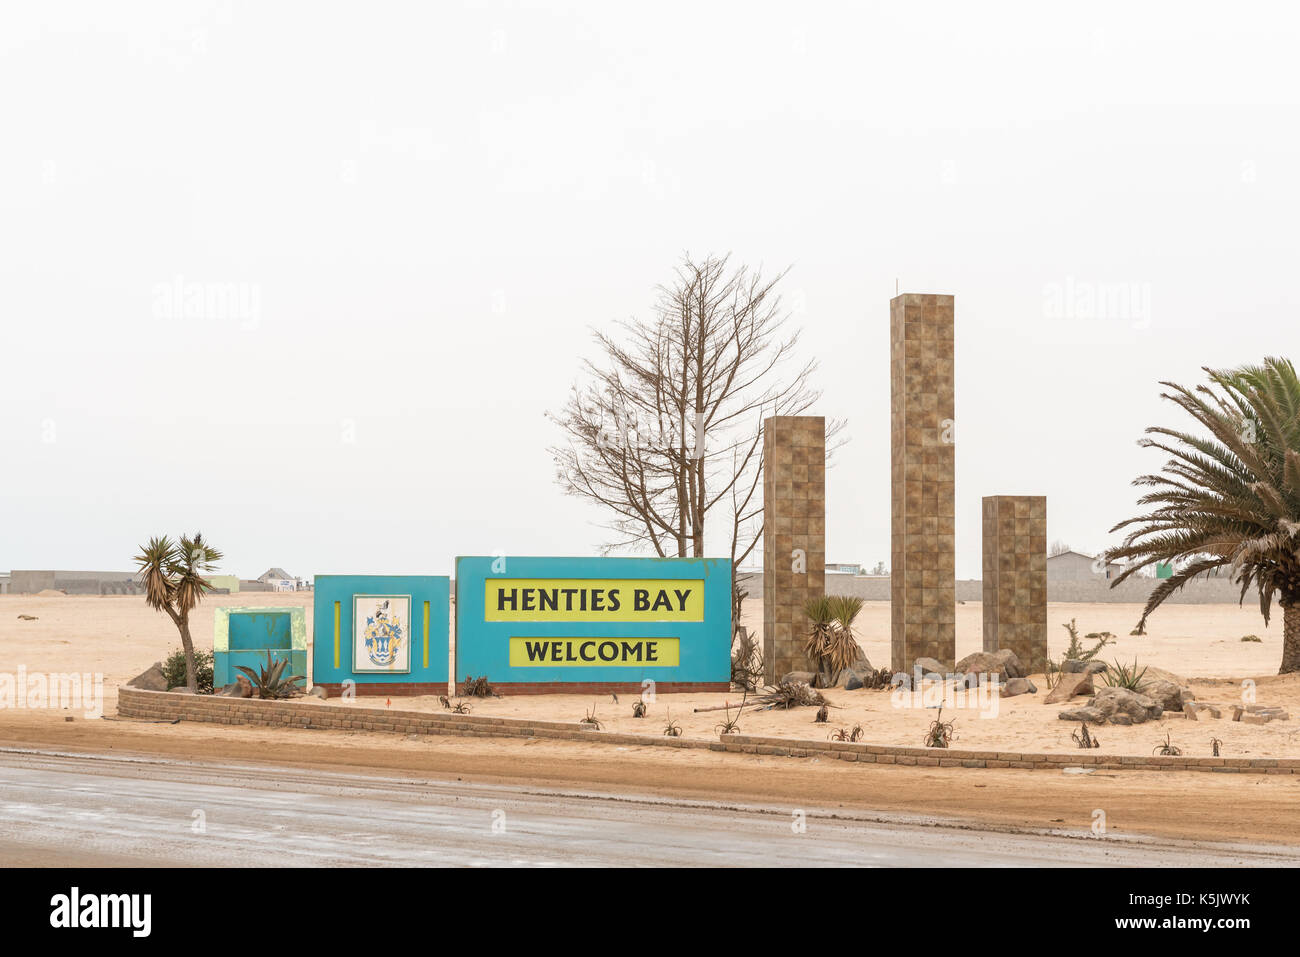 HENTIES BAY, NAMIBIA - JUNE 29, 2017: Welcome sign at the northern entrance to Hentiesbaai (Henties Bay), a well known recreational fishing town on th Stock Photo